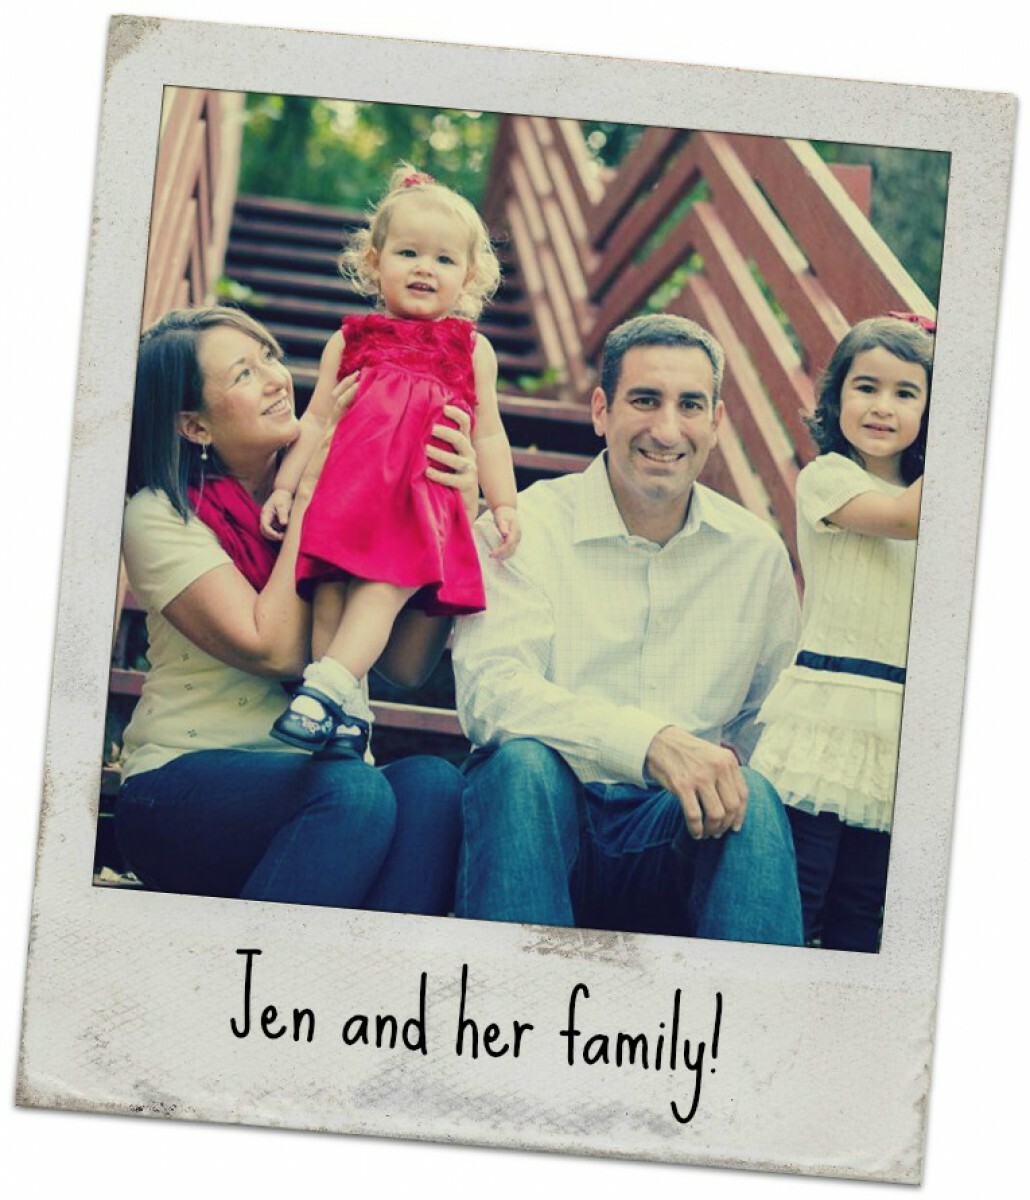 Polaroid style picture of Jen Kelly and family with 'Jen and her family!'?